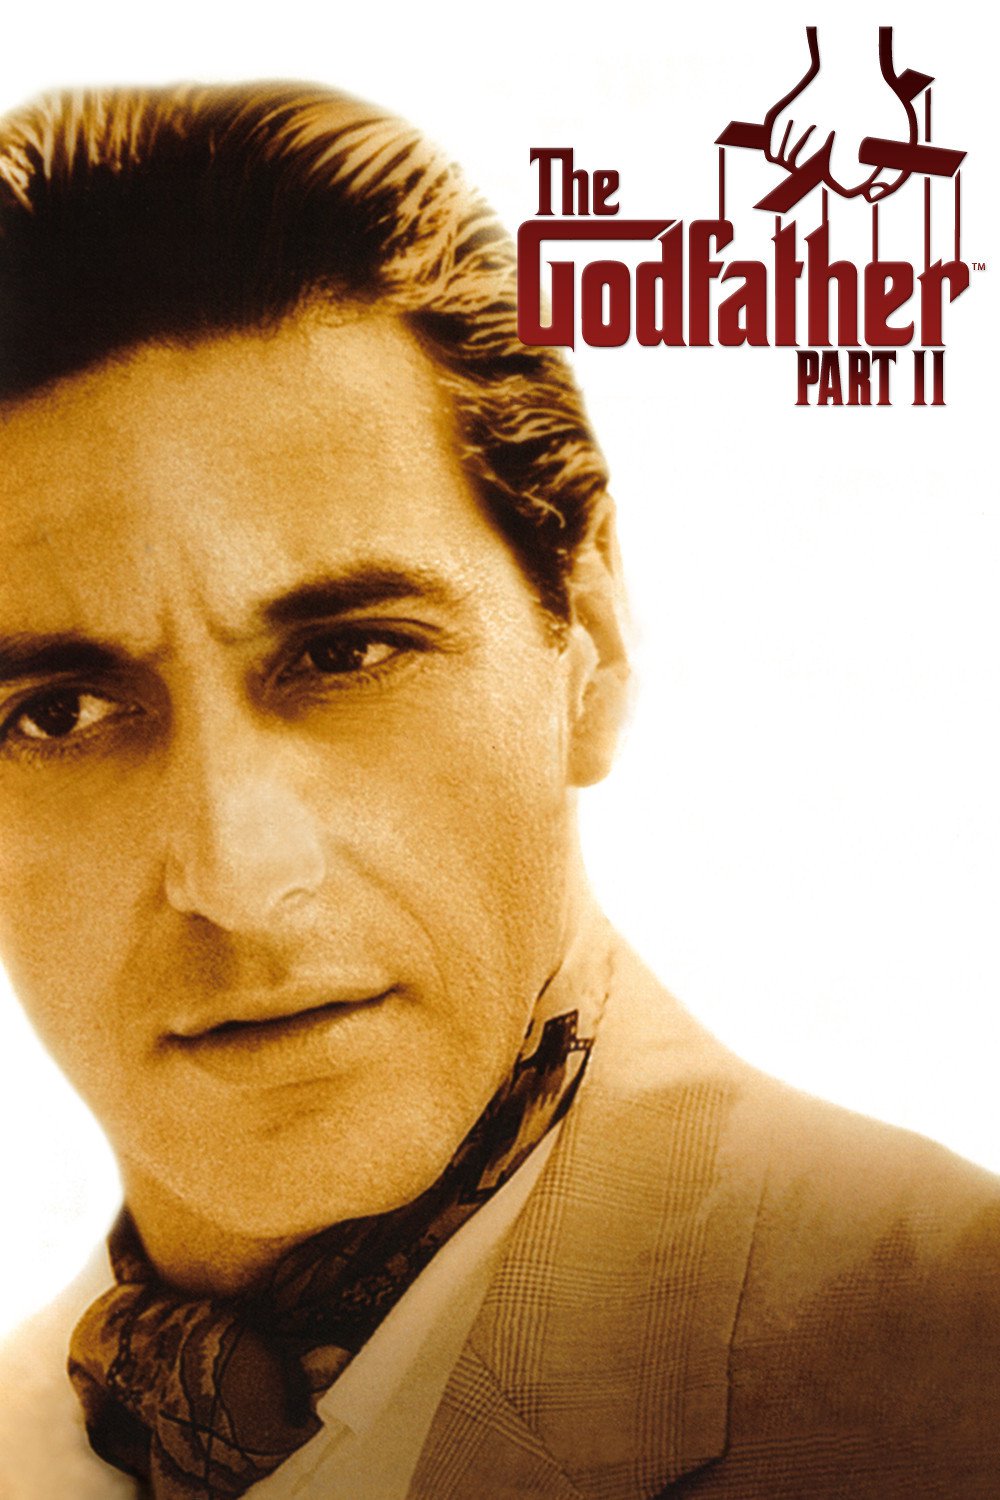 Poster for the movie "The Godfather: Part II"